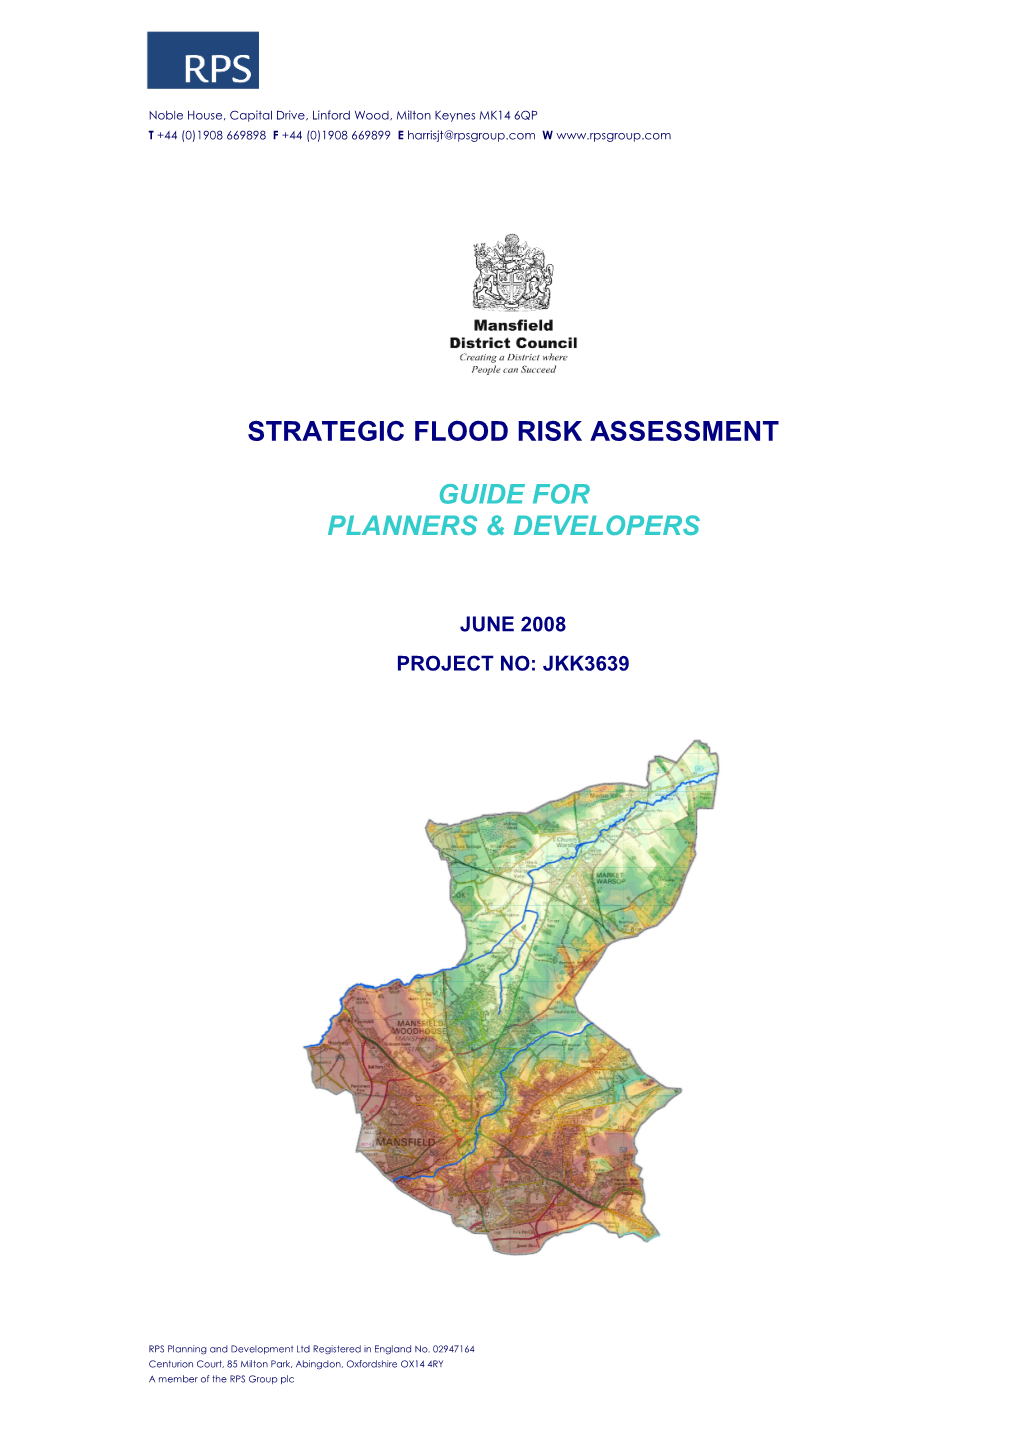 Mansfield Strategic Flood Risk Assessment –Guide for Planners and Developers